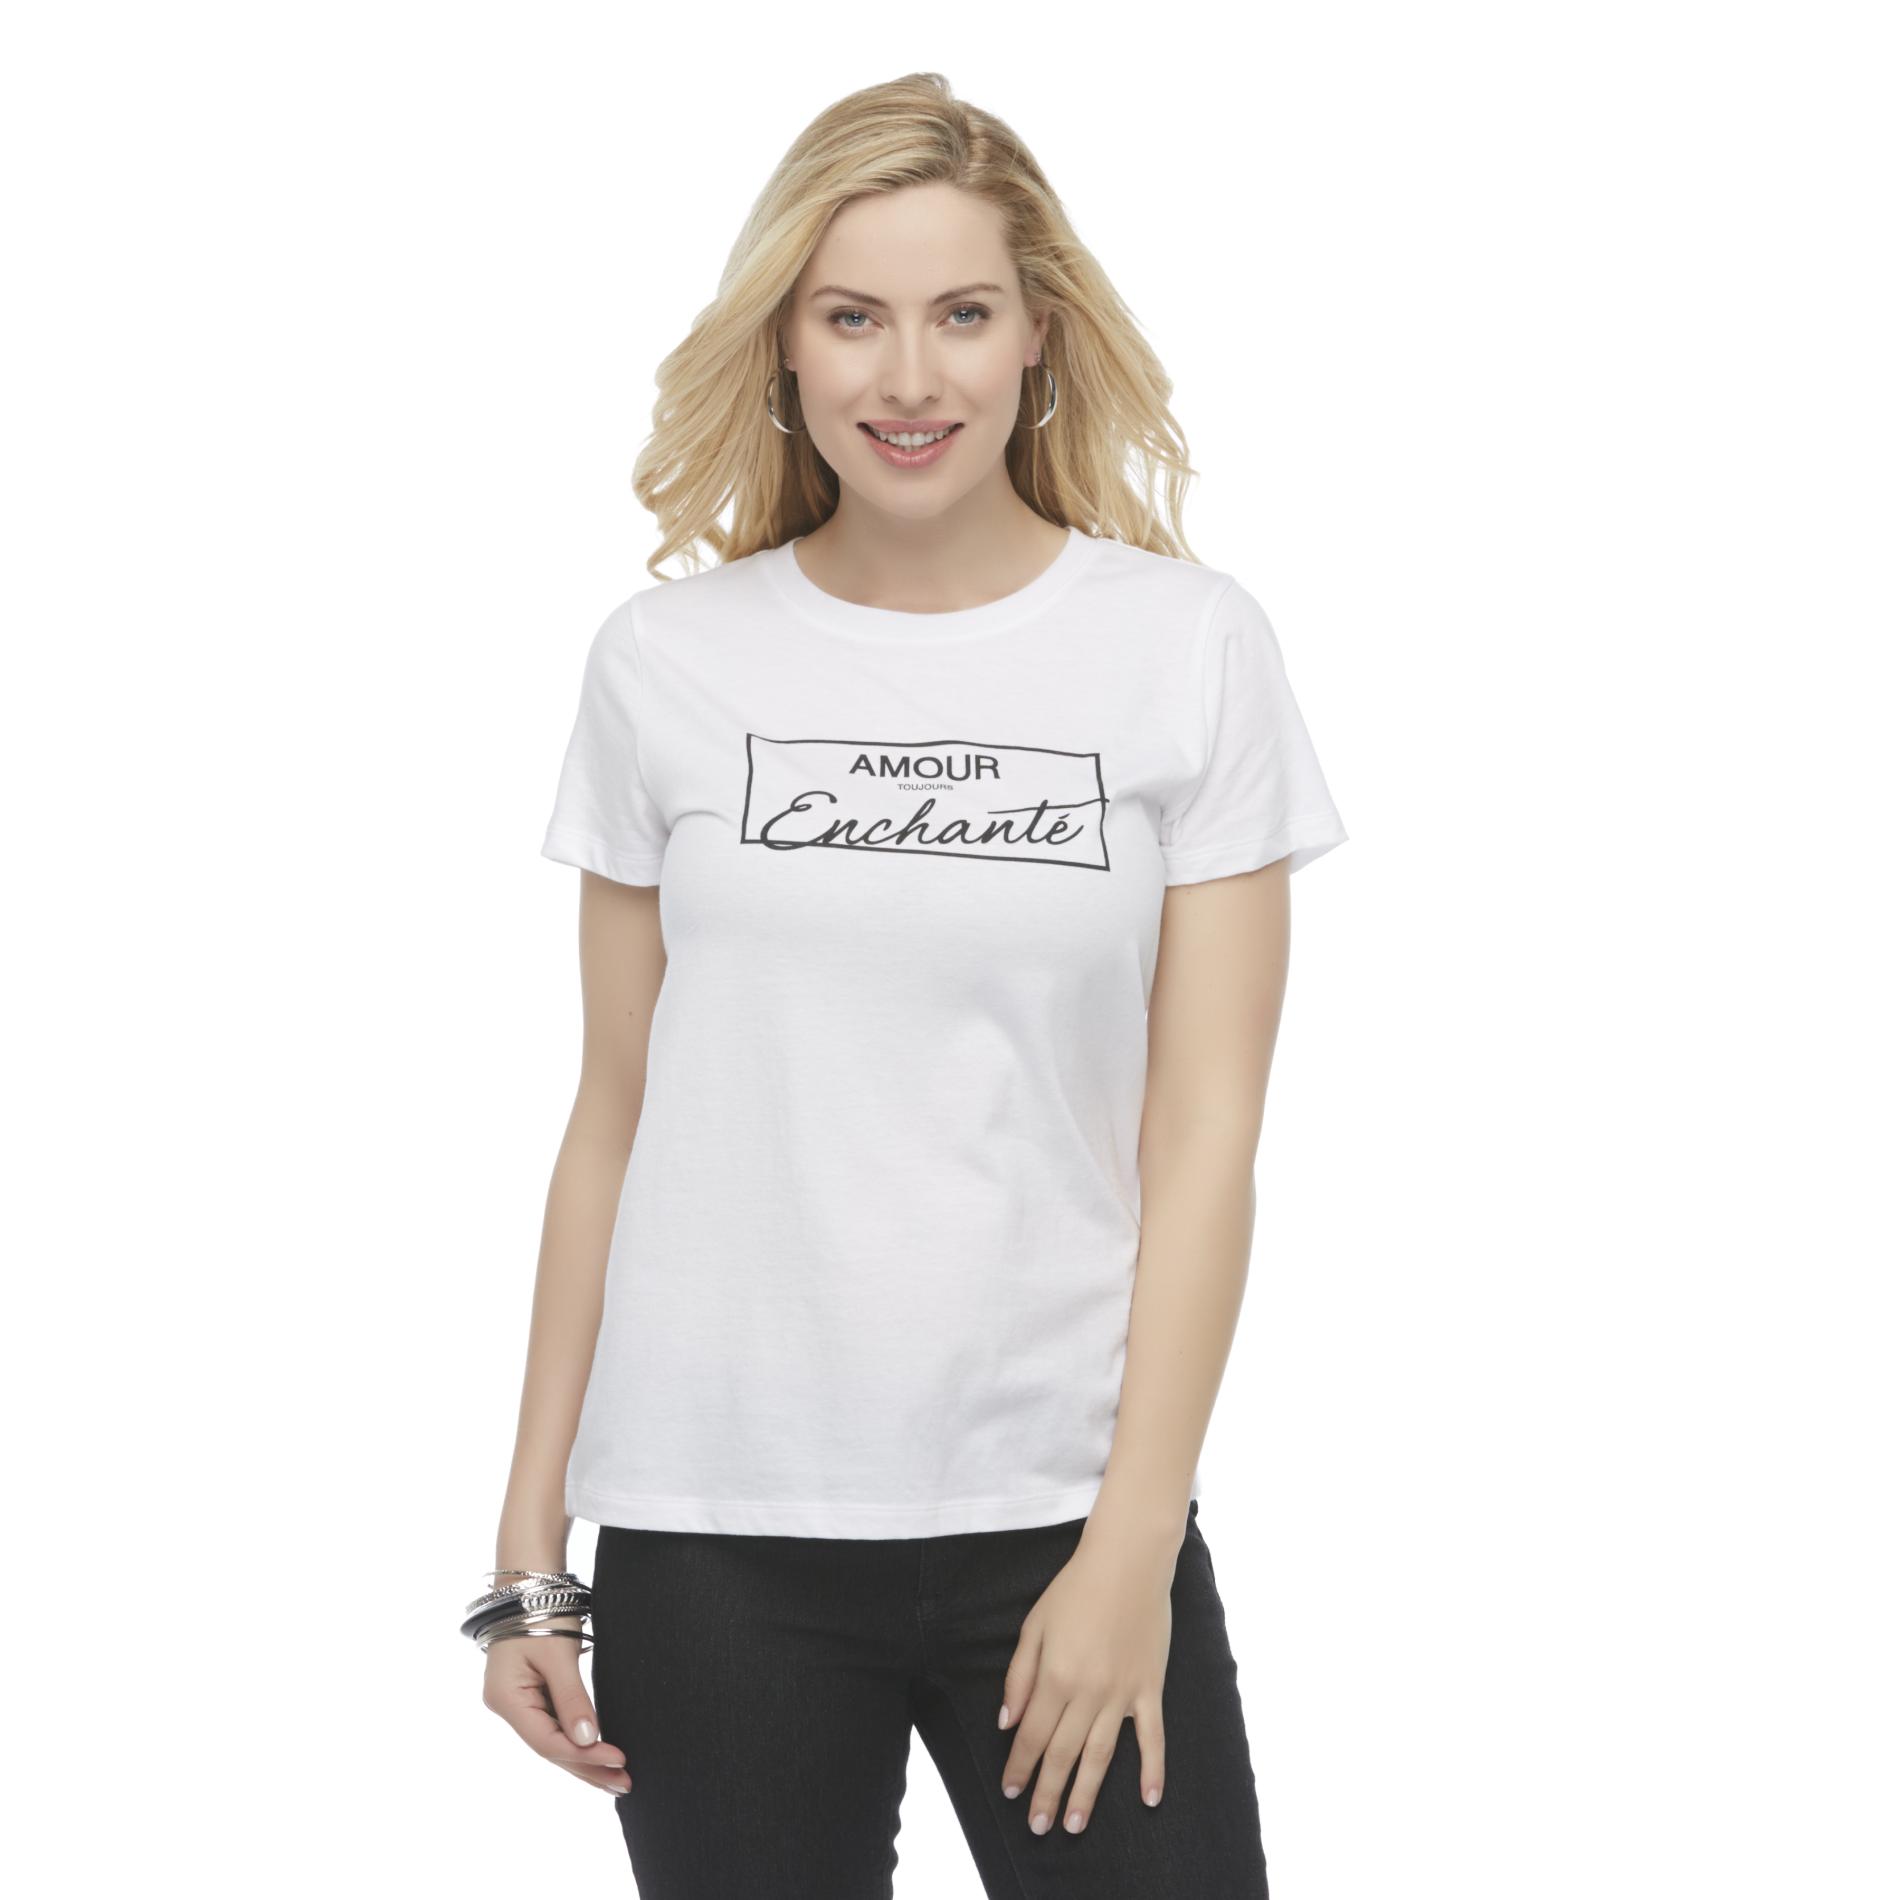 Attention Women's Graphic T-Shirt - Amour Toujours